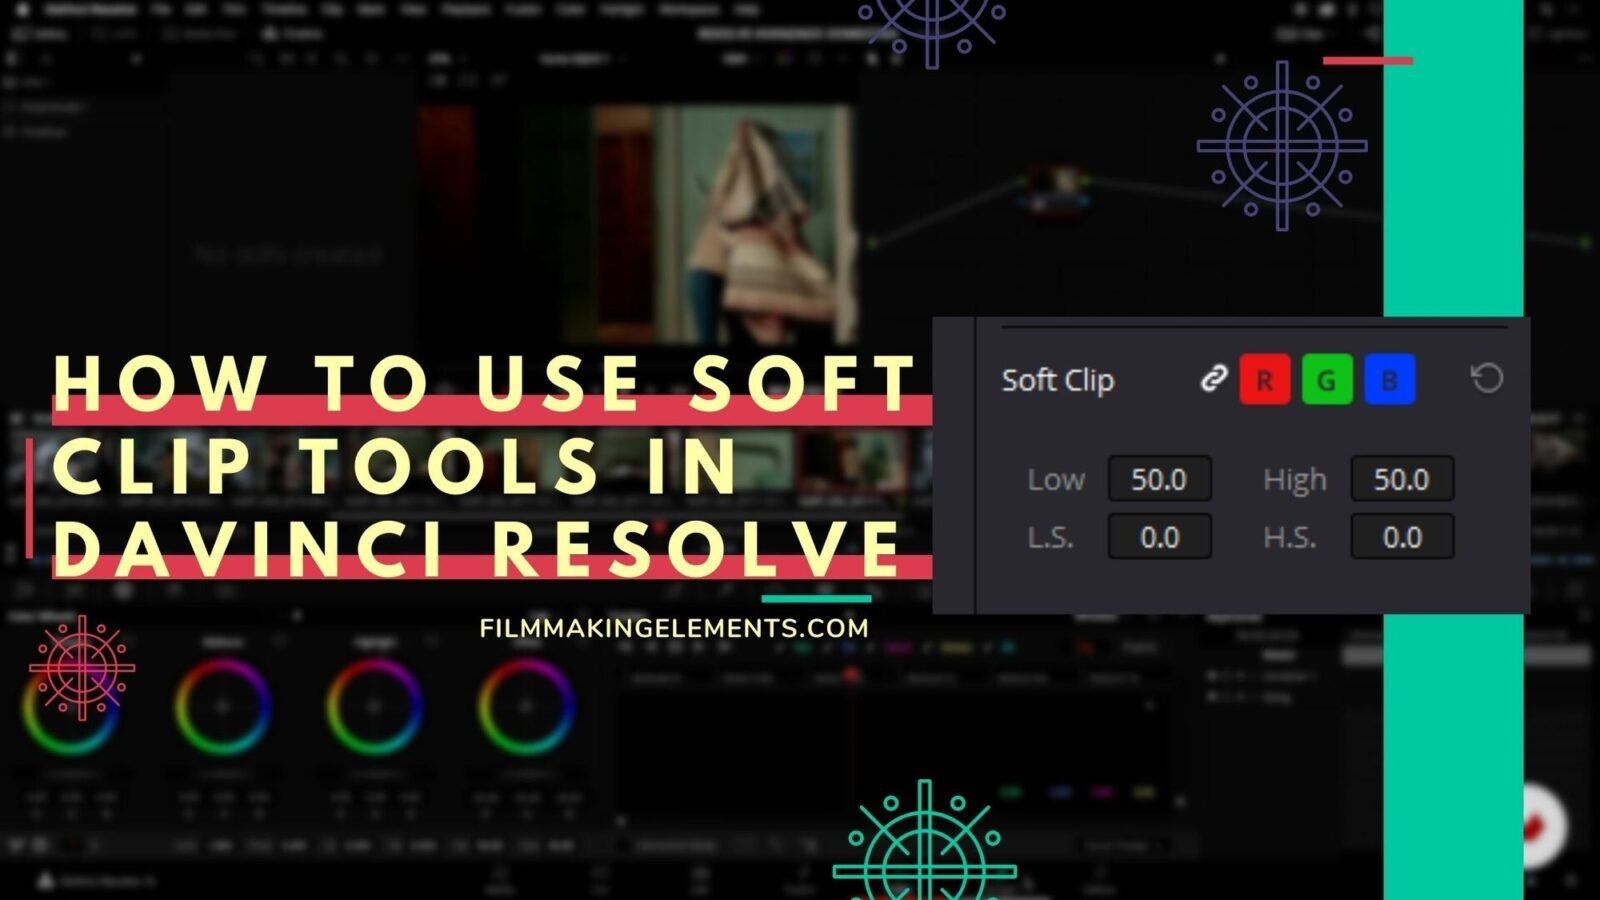 How To Use Soft Clip Tools In Davinci Resolve